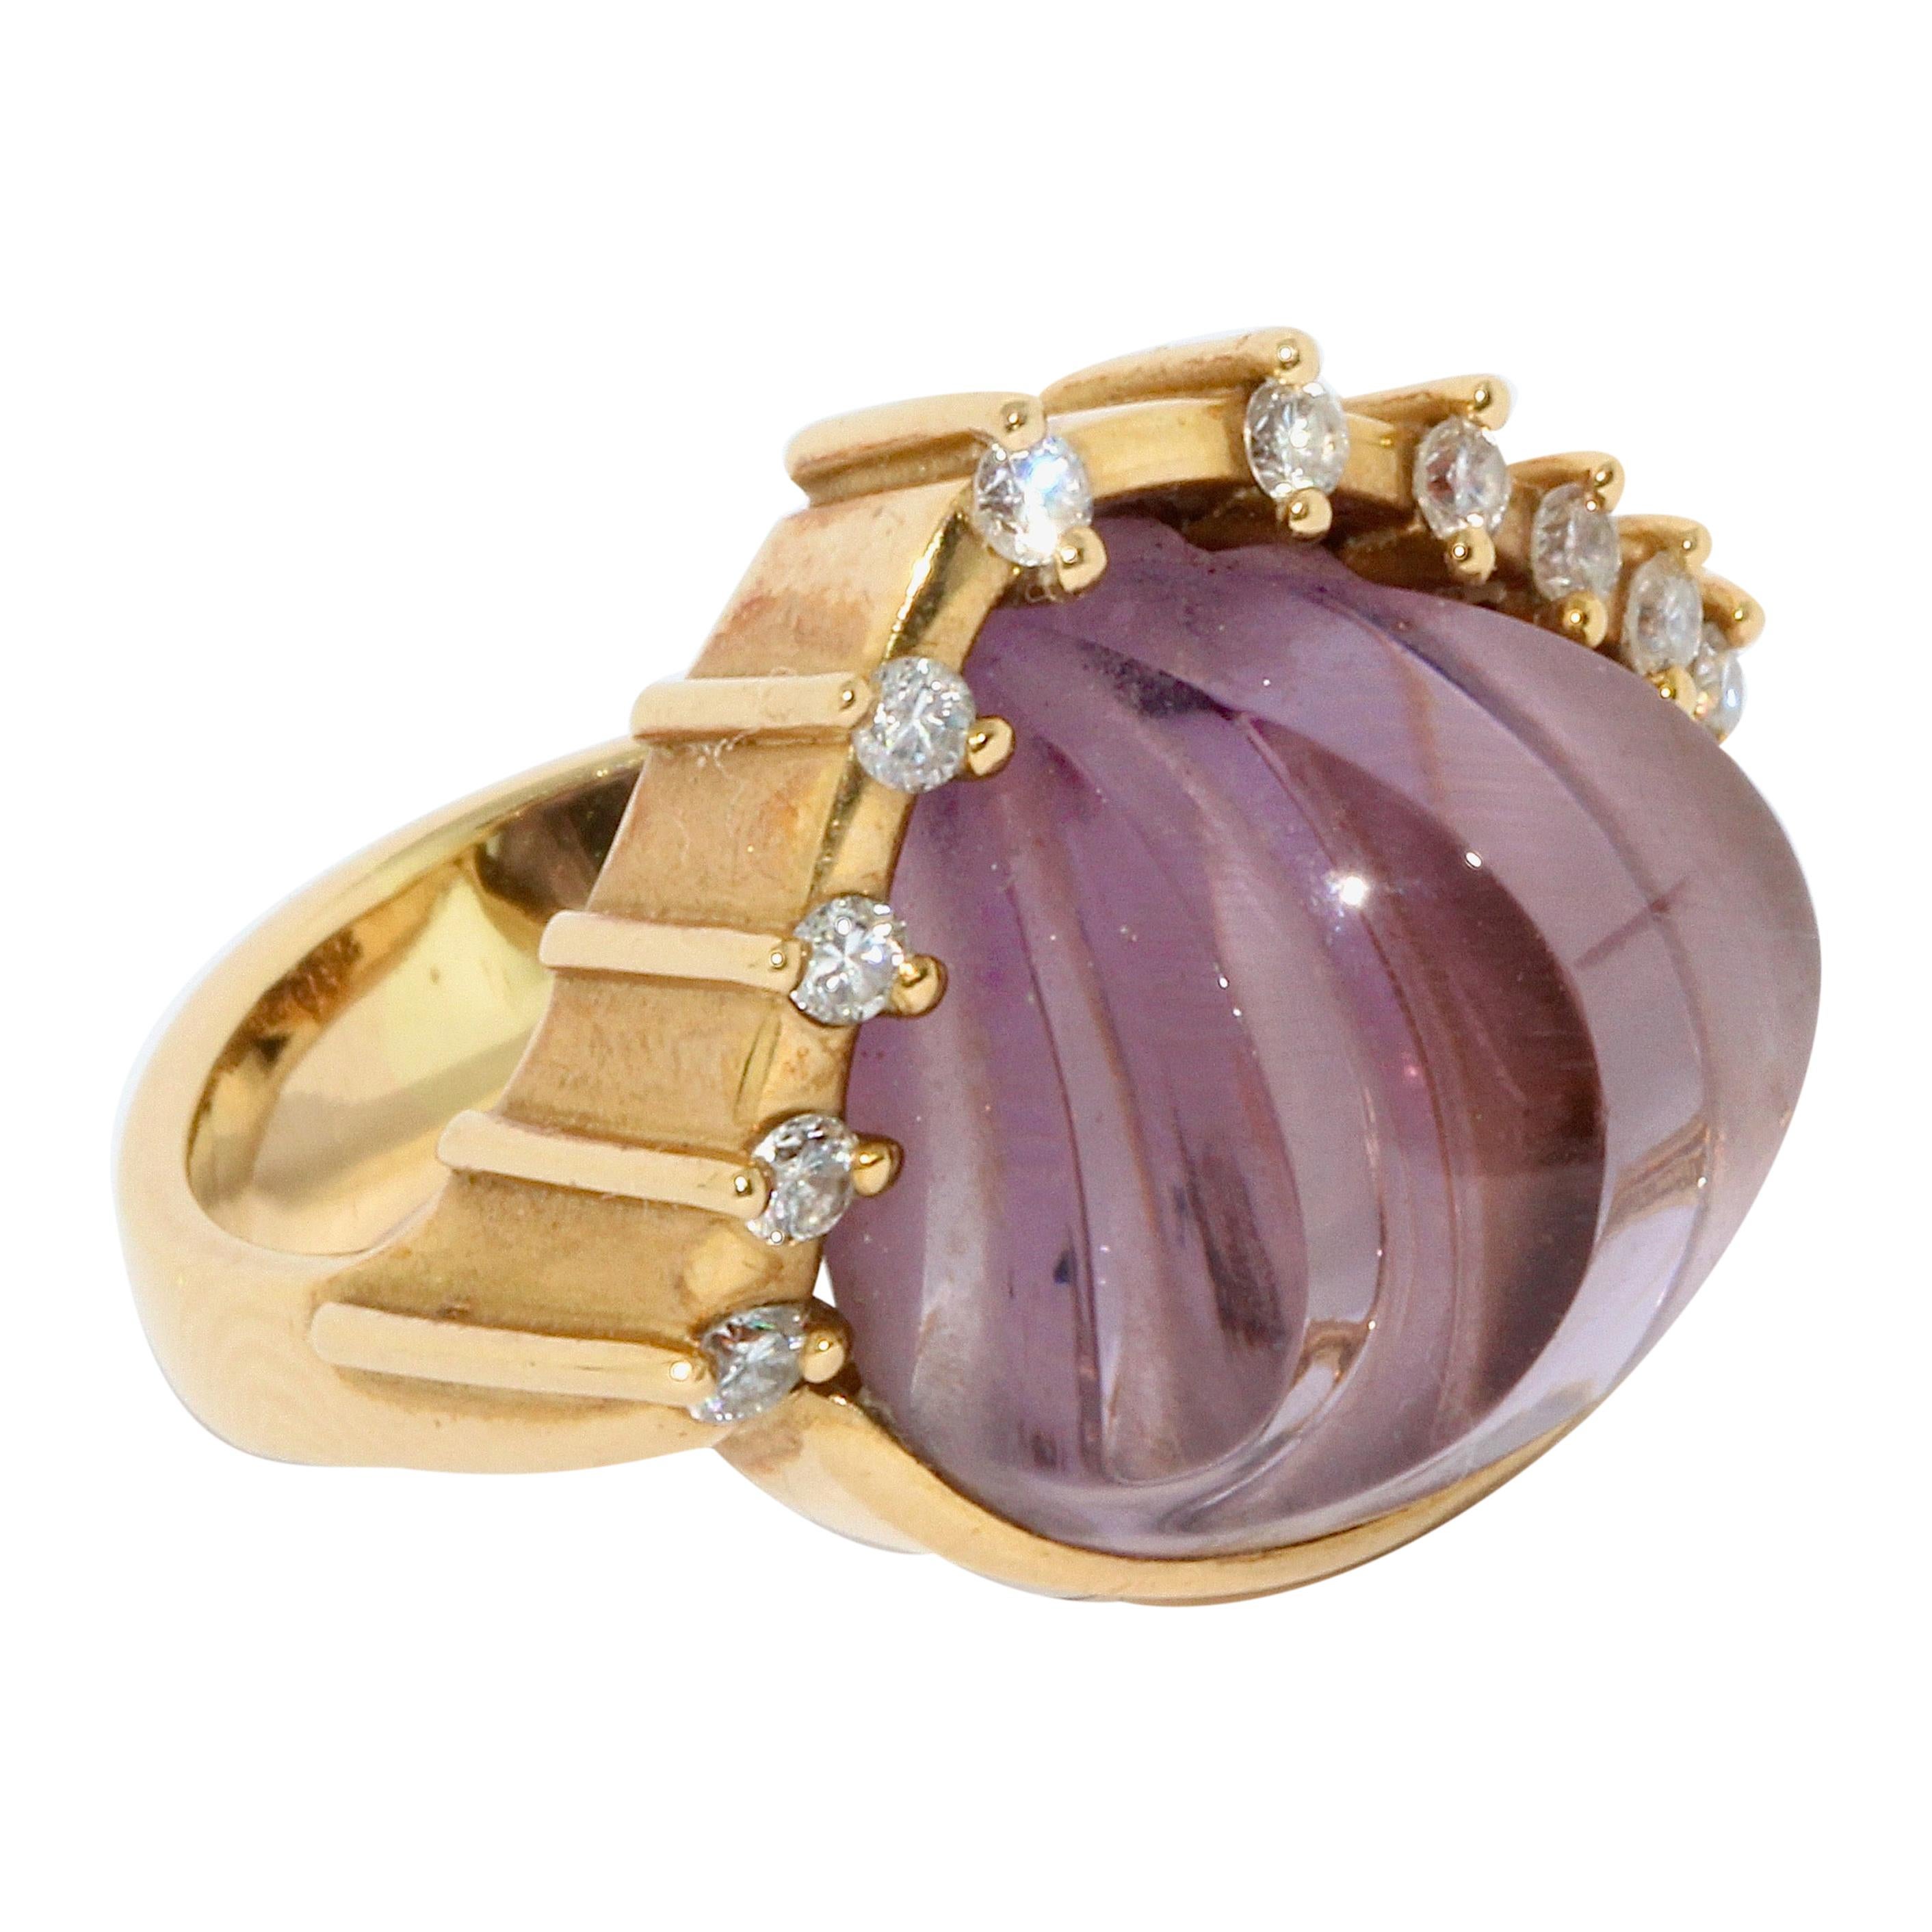 Cadeaux Jewelry, 18 Karat Gold Ring Set with Large Amethyst and Diamonds